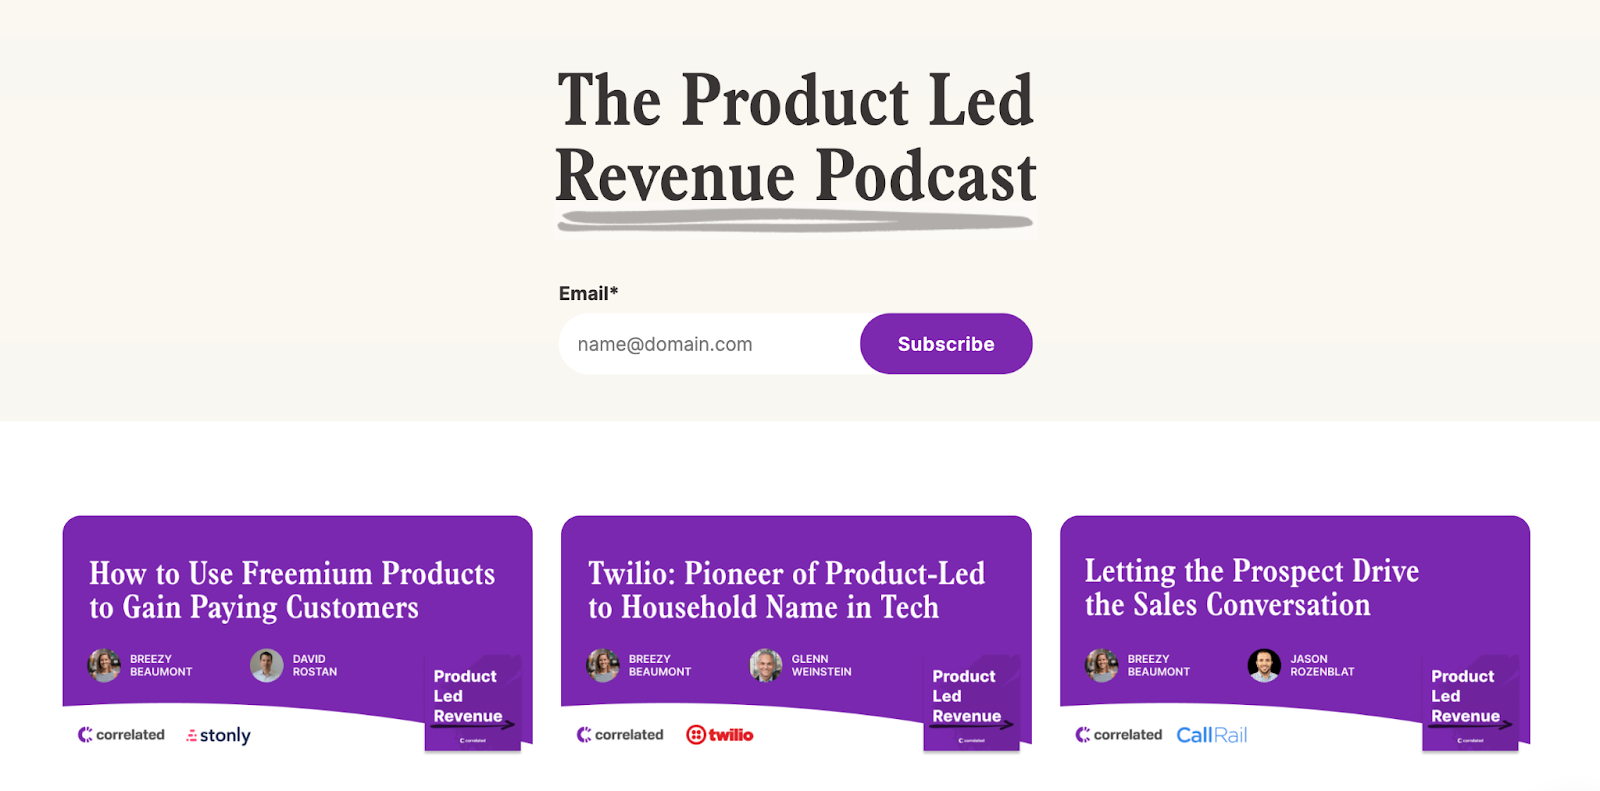 The Product Led Revenue Podcast